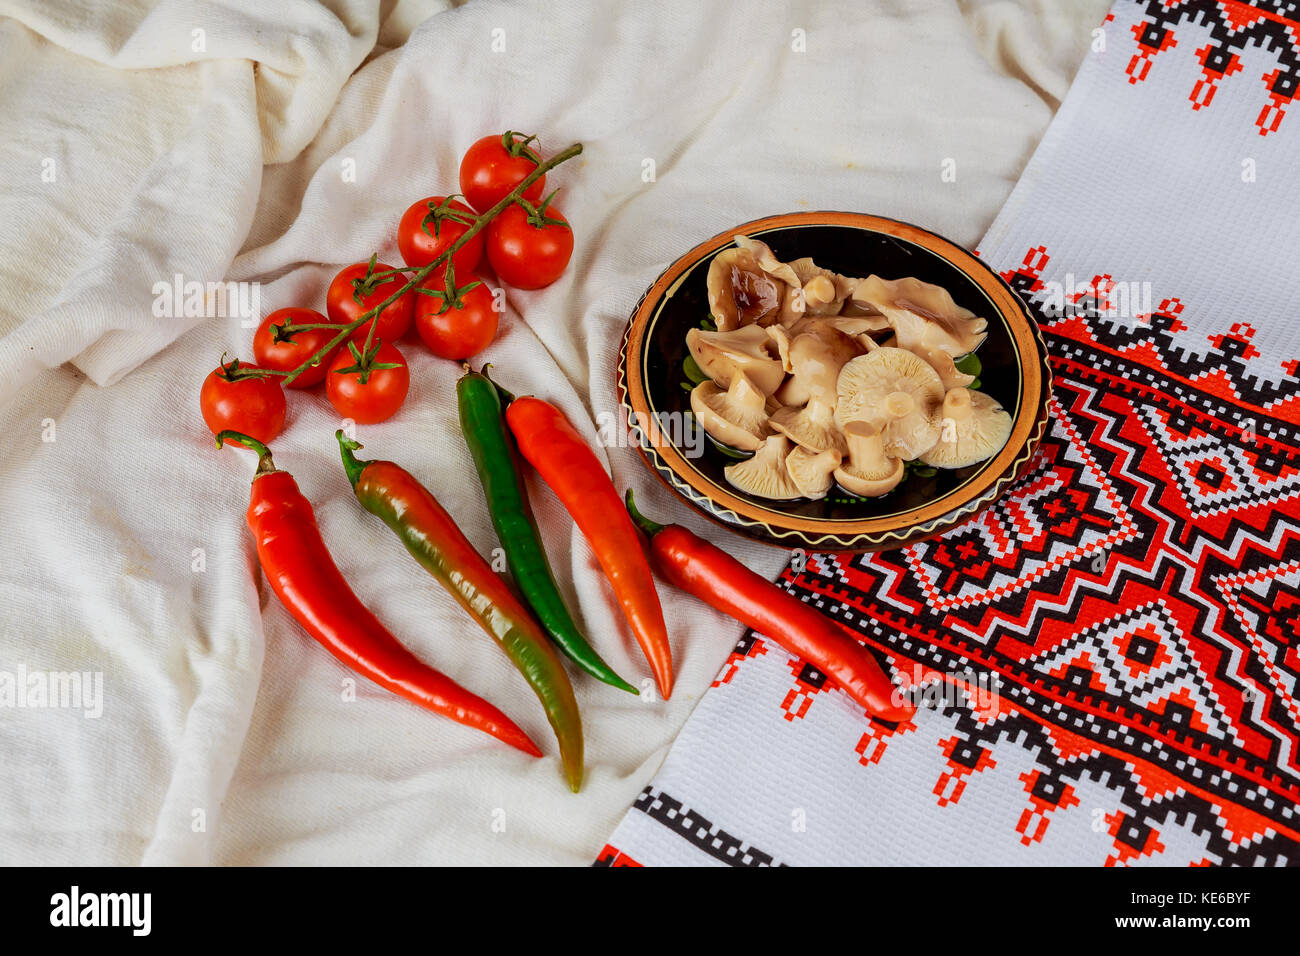 mushrooms on a plate of tomatoes pepper and Ukrainian embroidery mushrooms sauteed in small white bowl Stock Photo